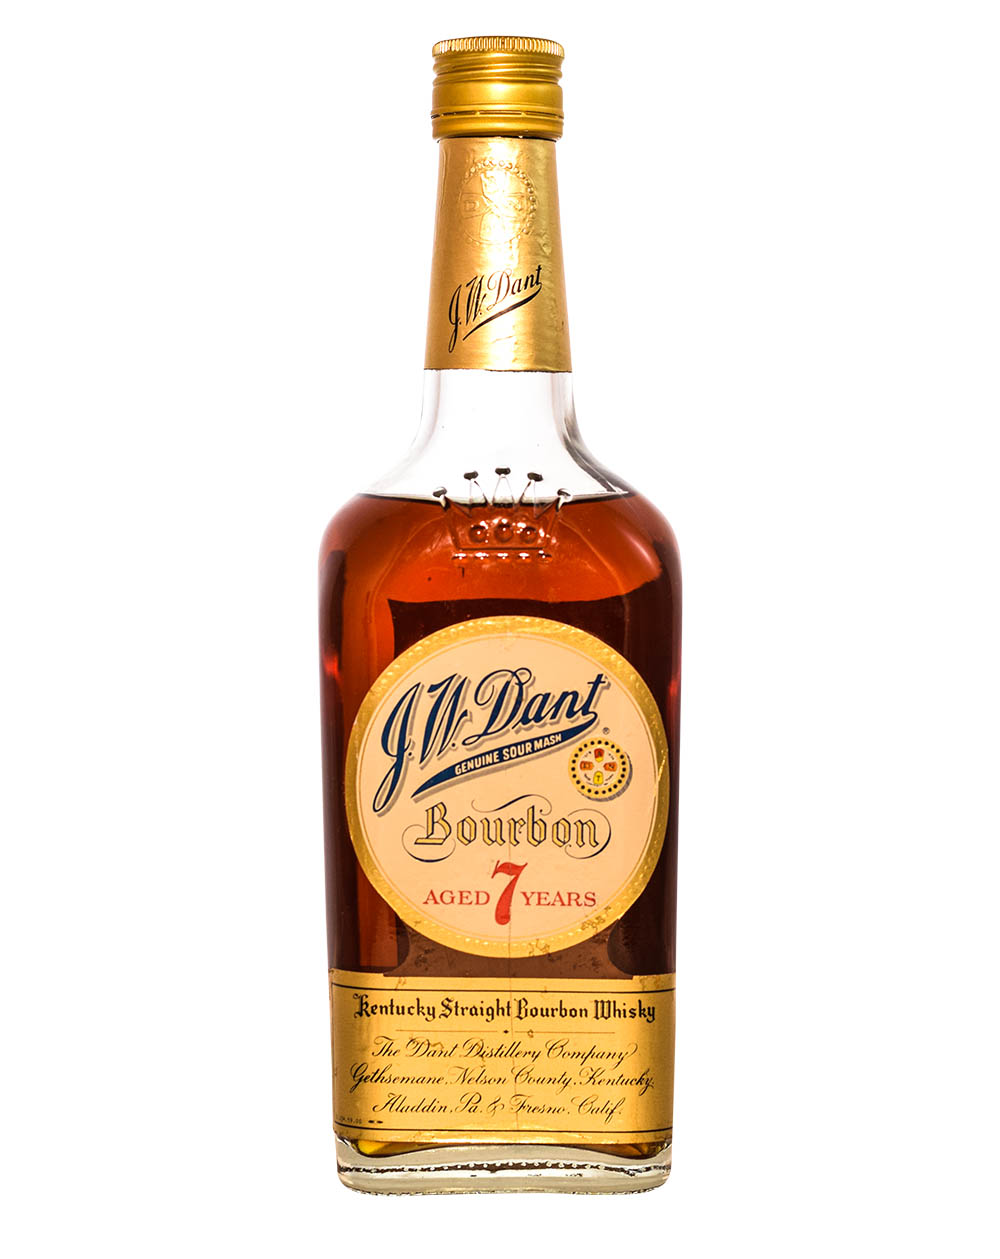 J.W. Dant Genuine Sour Mash Bourbon (7 Years Old) Musthave Malts MHM